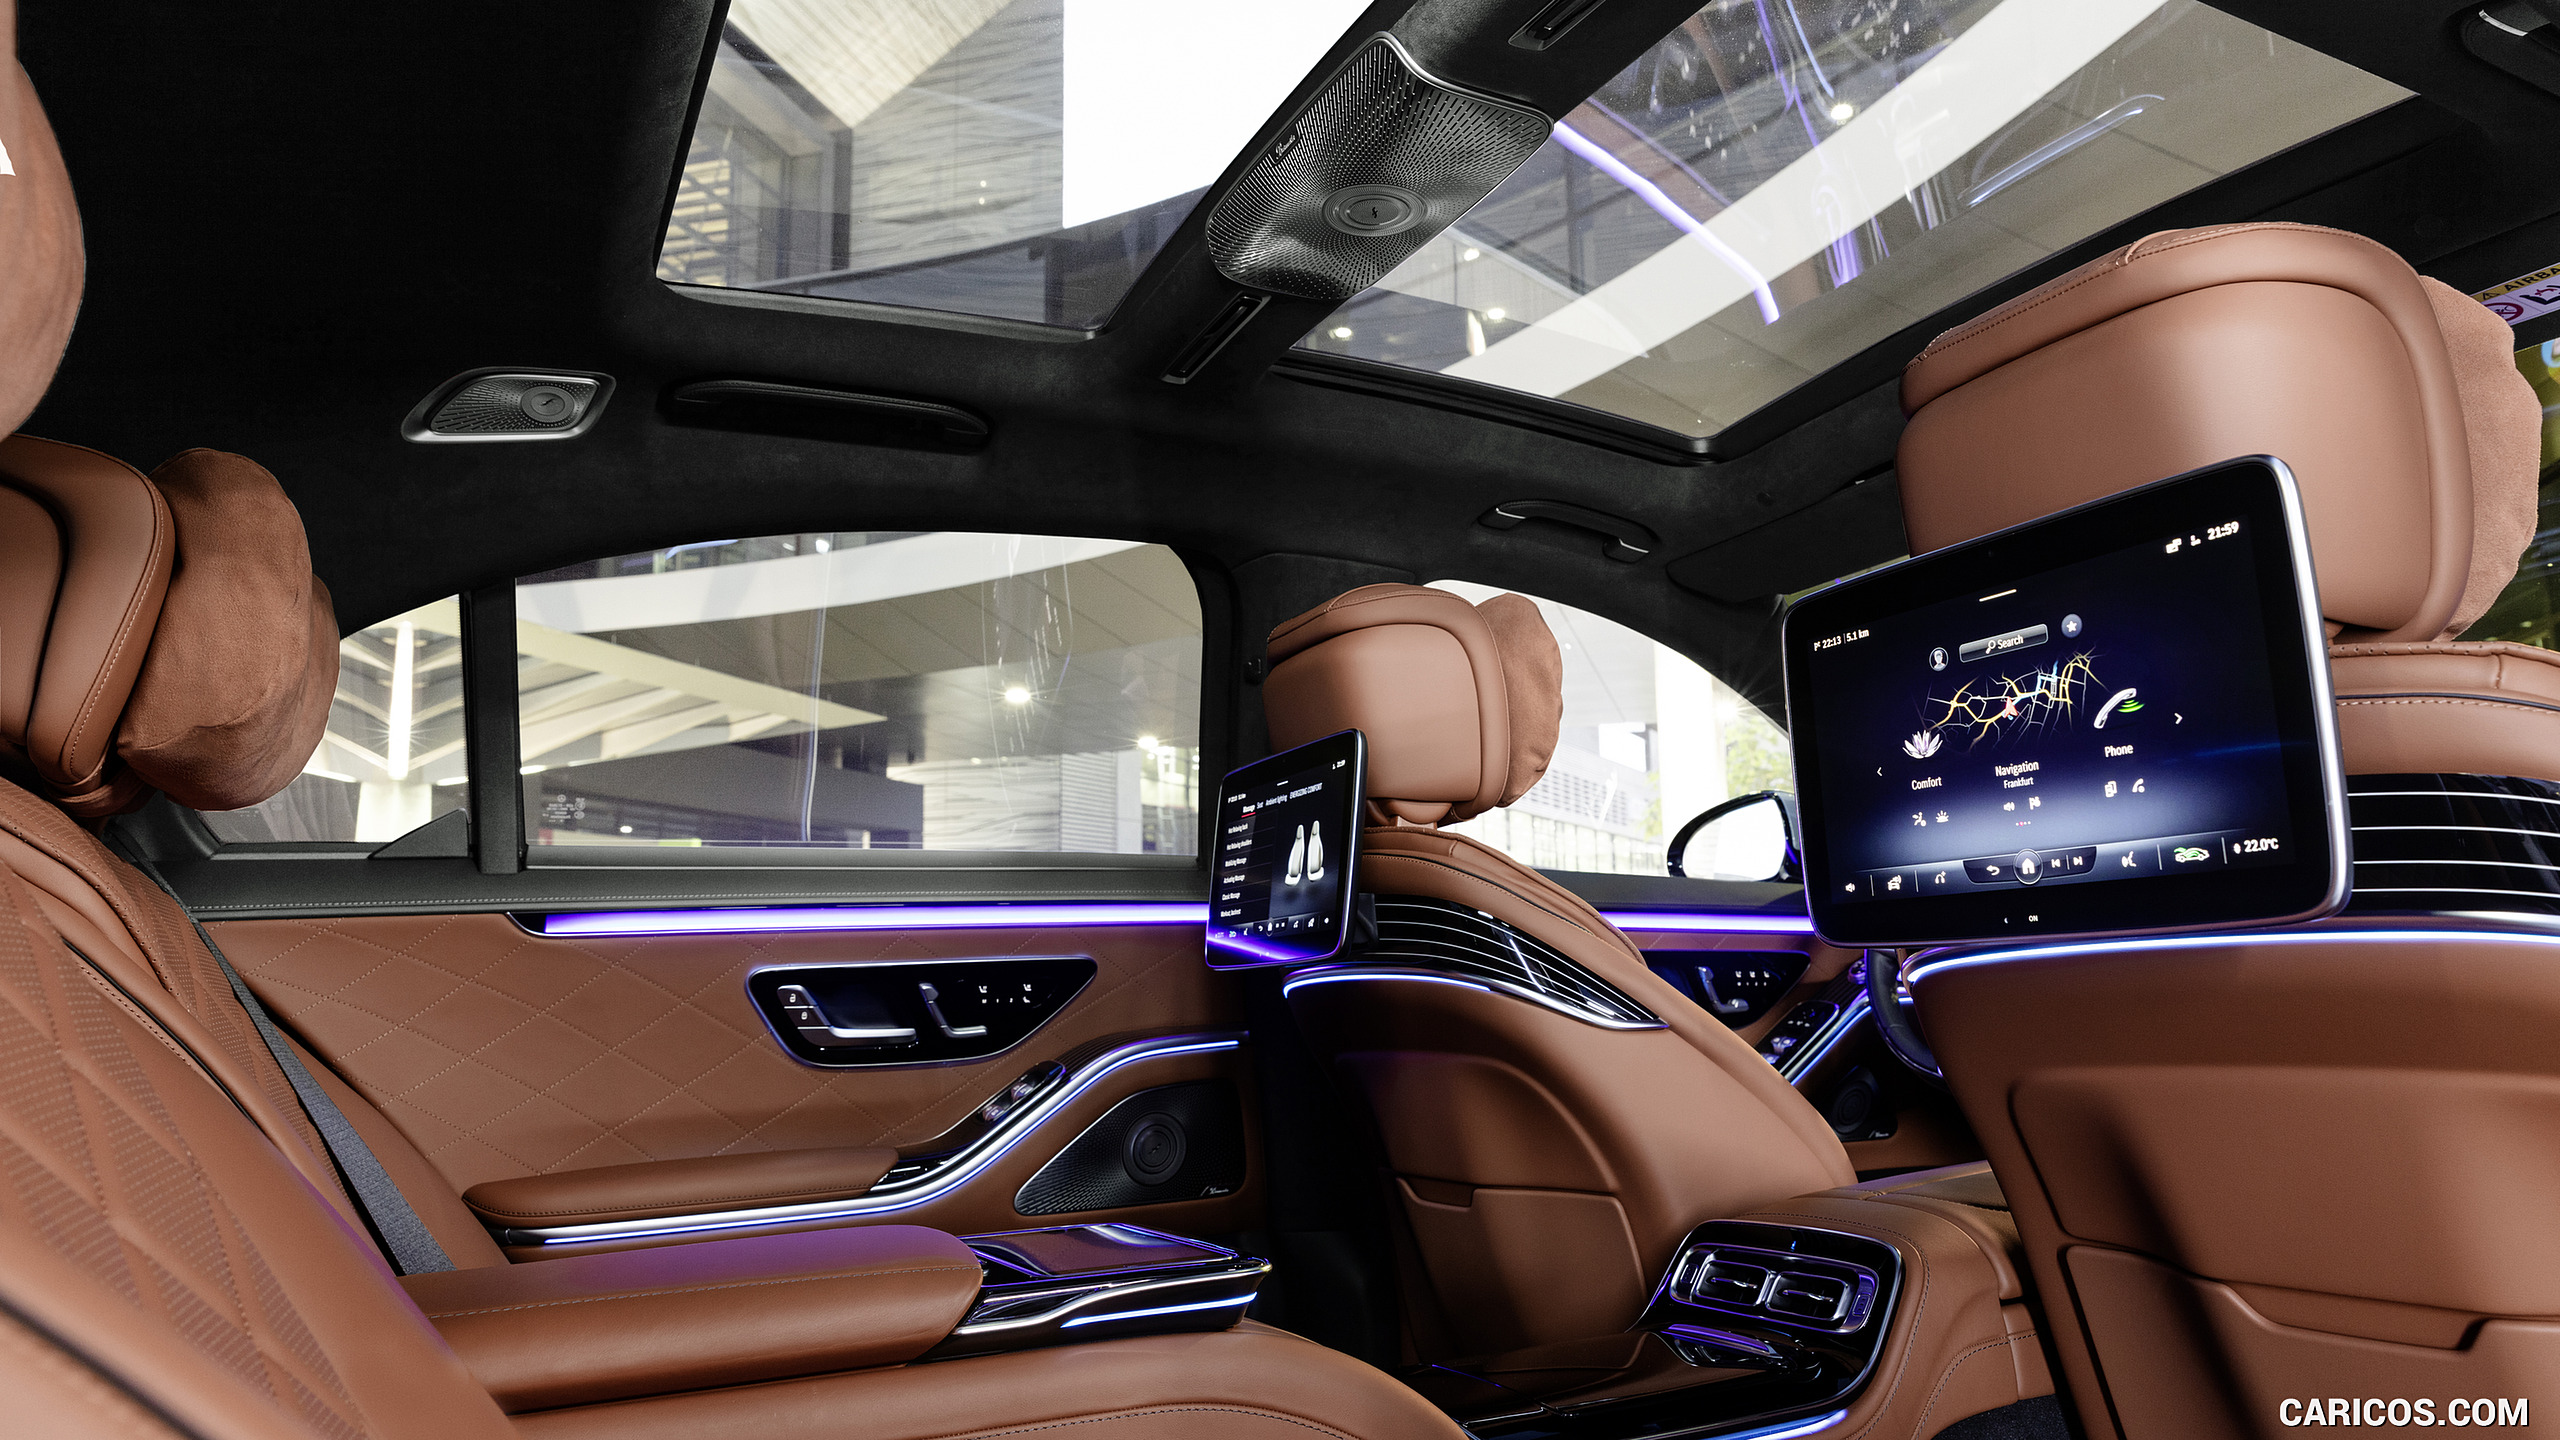 2021 Mercedes-Benz S-Class (Color: Leather Siena Brown) - Interior, Rear Seats, #137 of 316